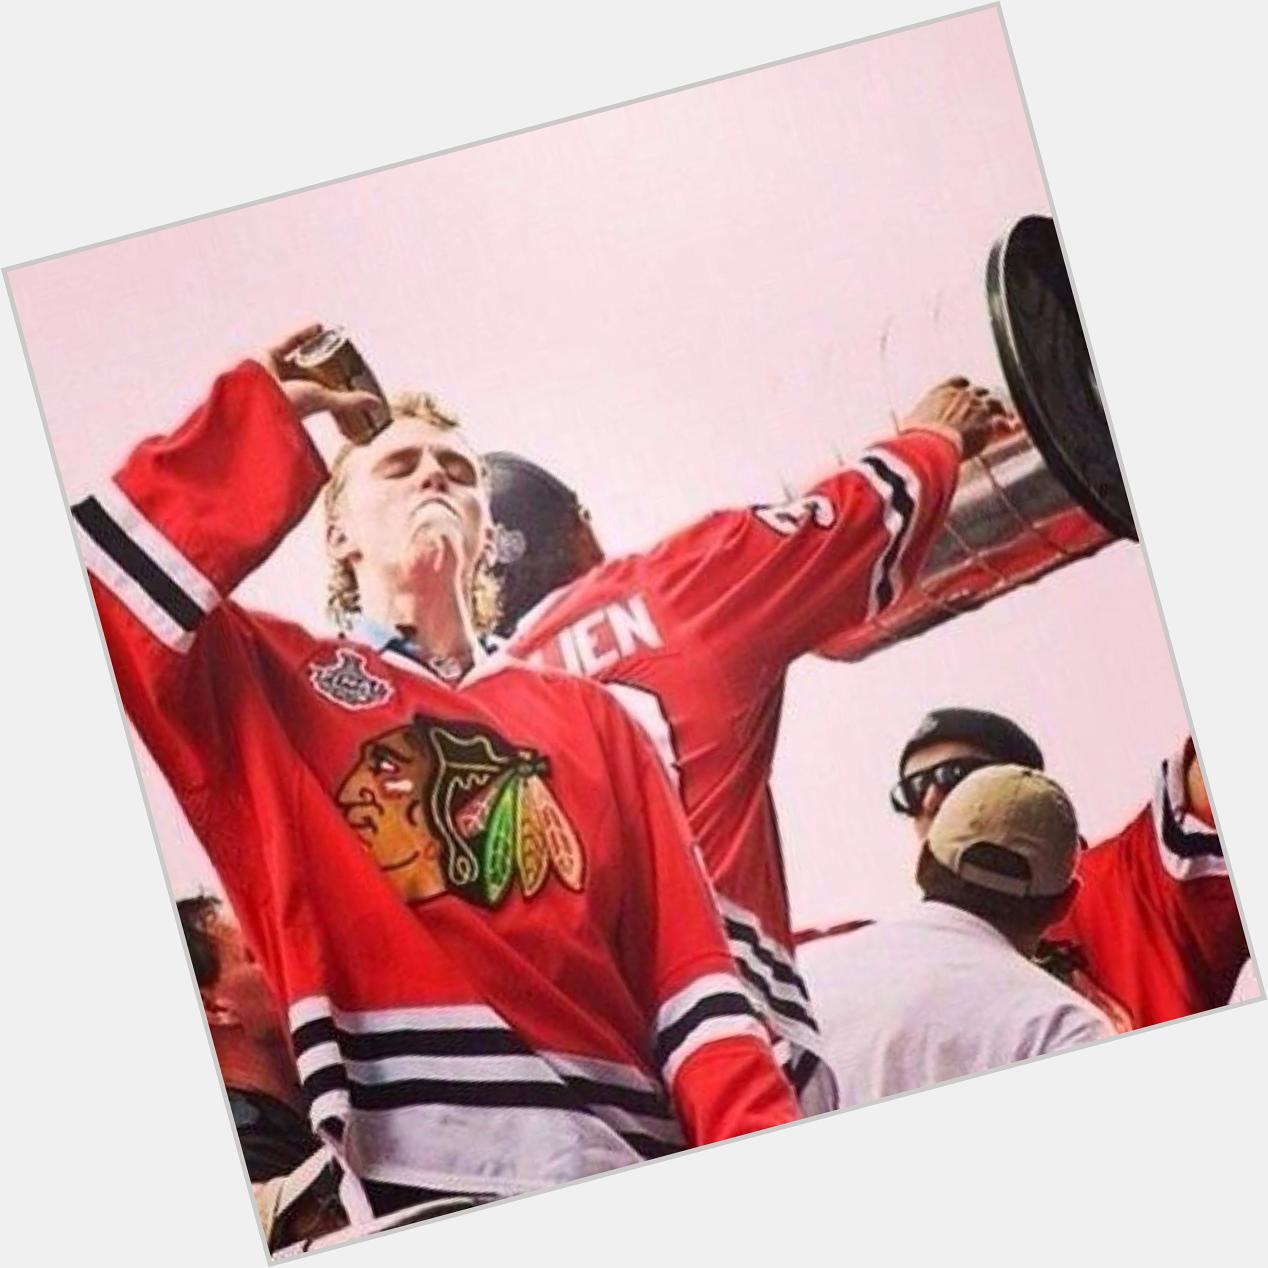 Happy birthday to the man, the myth, the legend, THE Patrick Kane. Hopefully we can outdo last year 